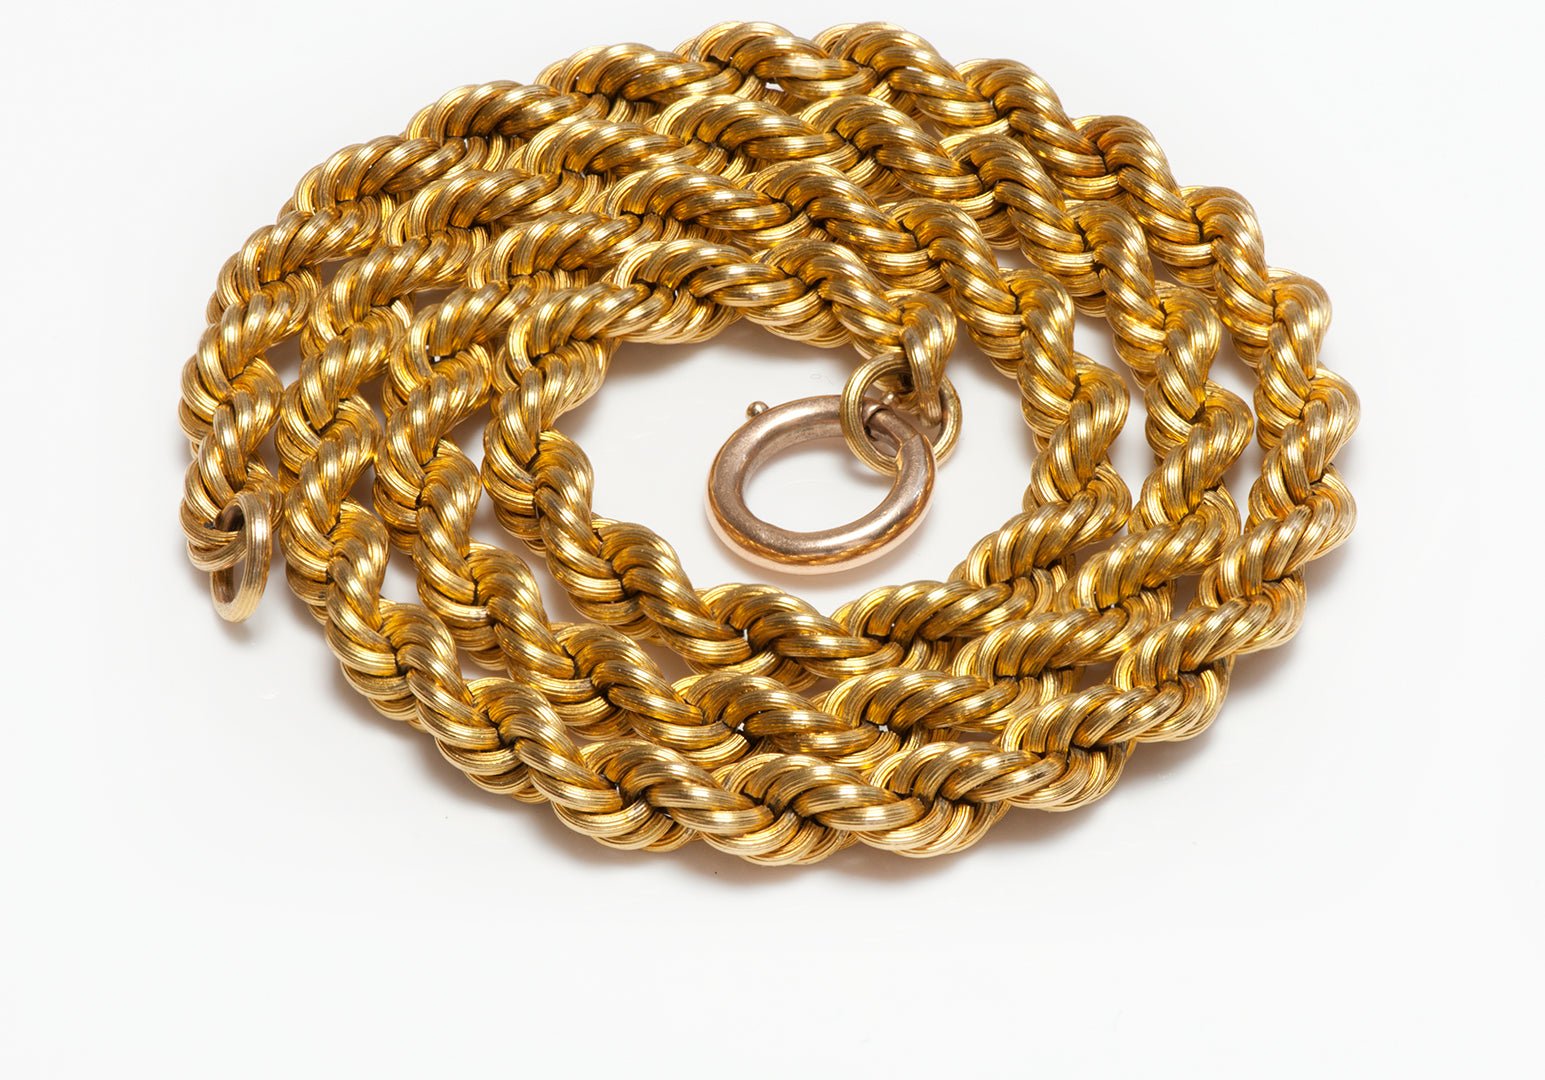 Antique Victorian 15K Yellow Gold Twisted Rope Chain Necklace - DSF Antique Jewelry